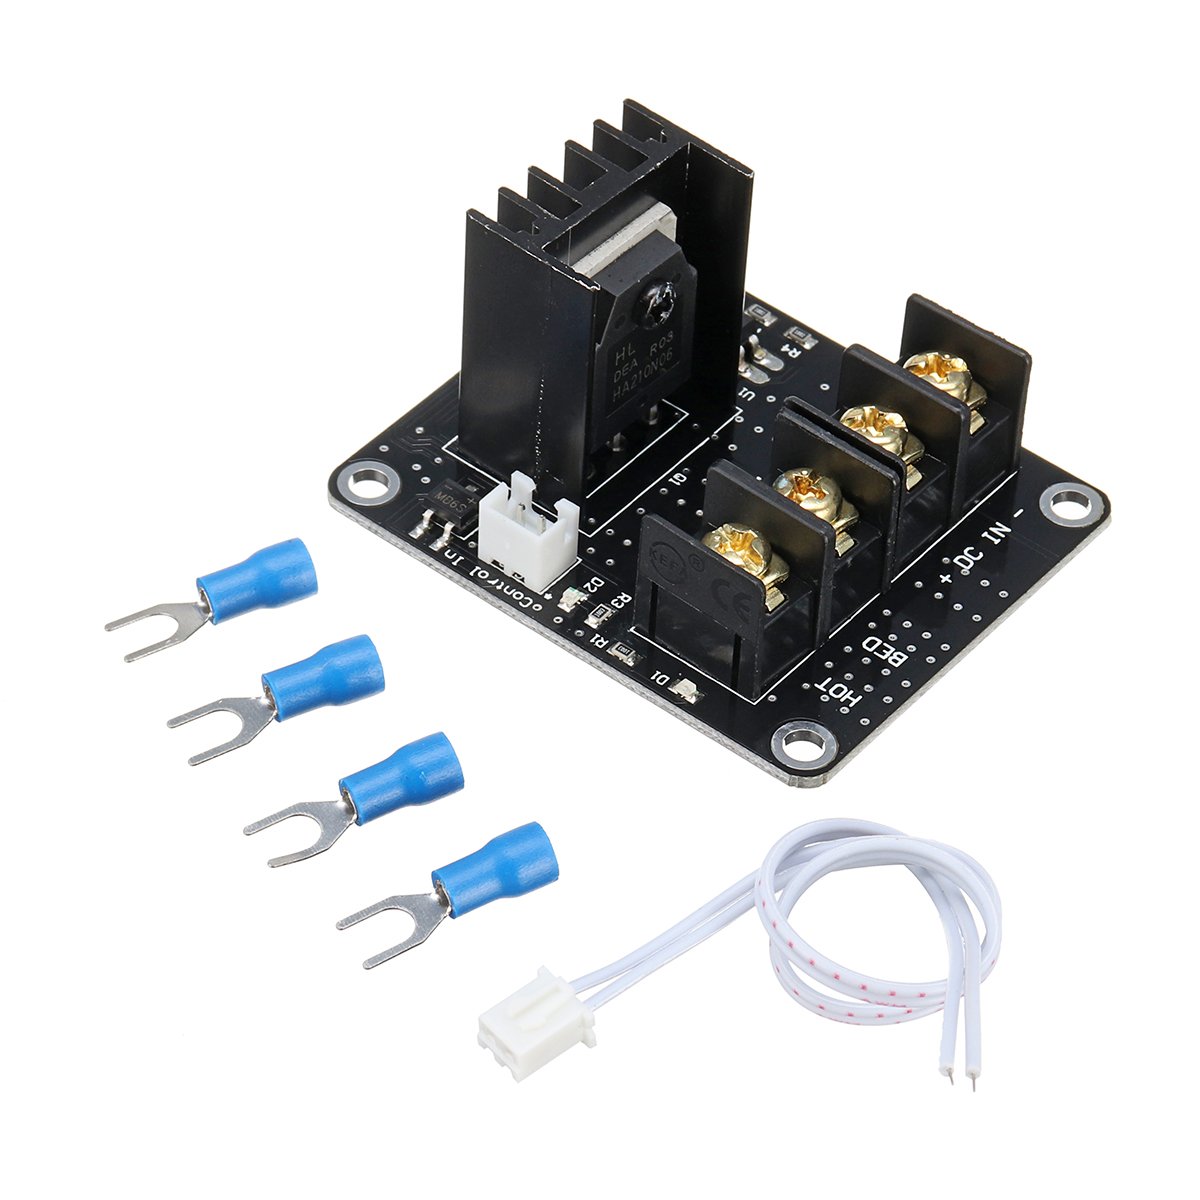 MOSFET High Power Heated Bed Expansion Power Module MOS Tube for 3D Printer Prusa i3 Anet A8/A6 2